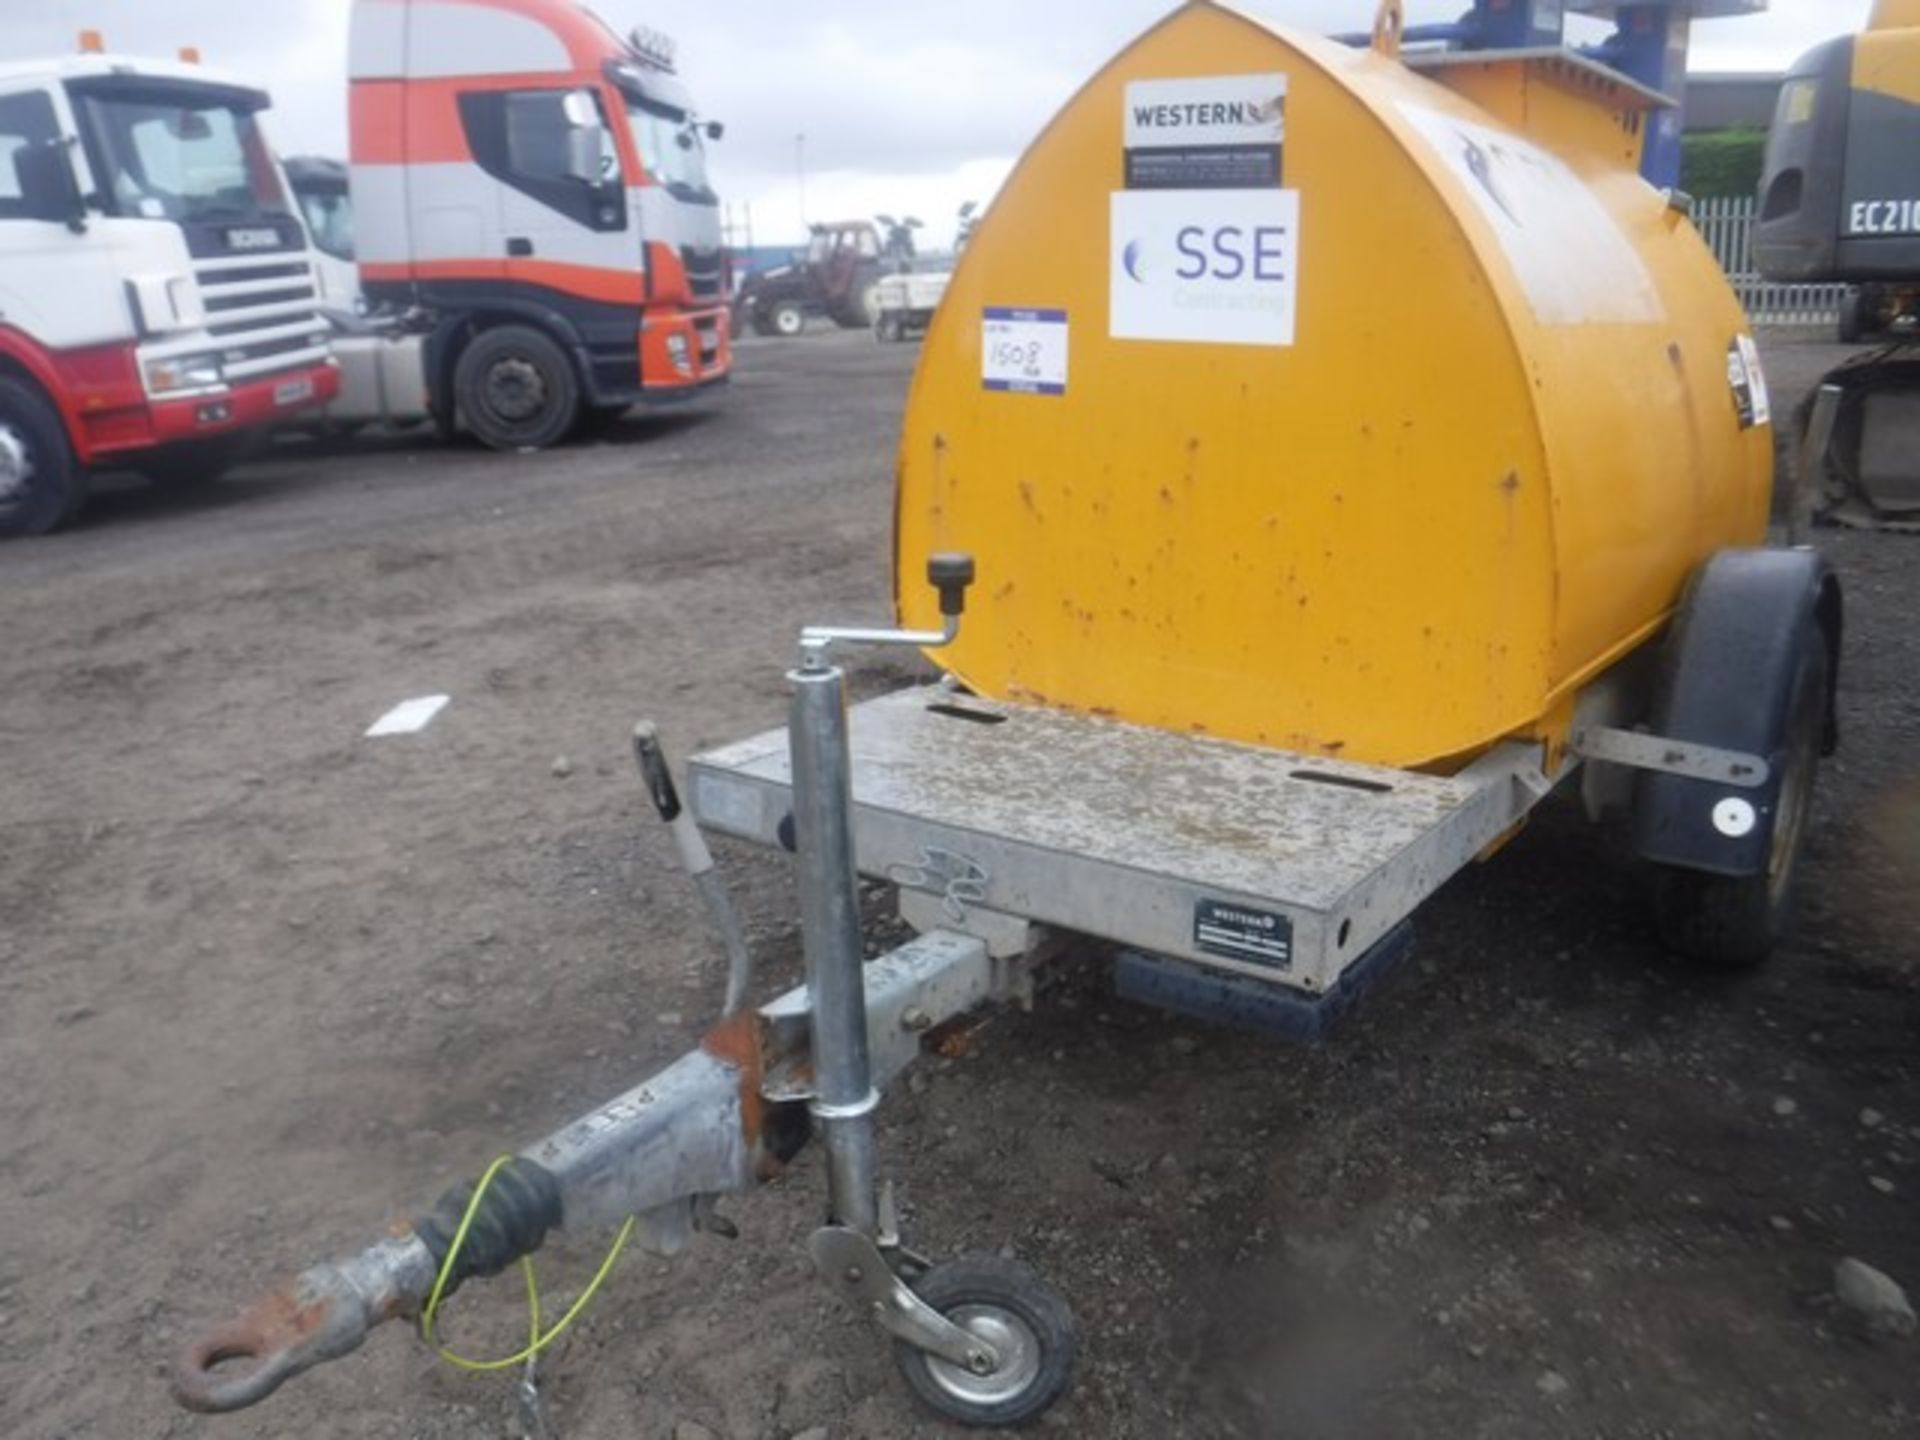 WESTERN FAST TOW 2010 DIESEL BOWSER 950LTR C/W ELECTRIC PUMP, HOSE AND NOZZLE - Image 2 of 9